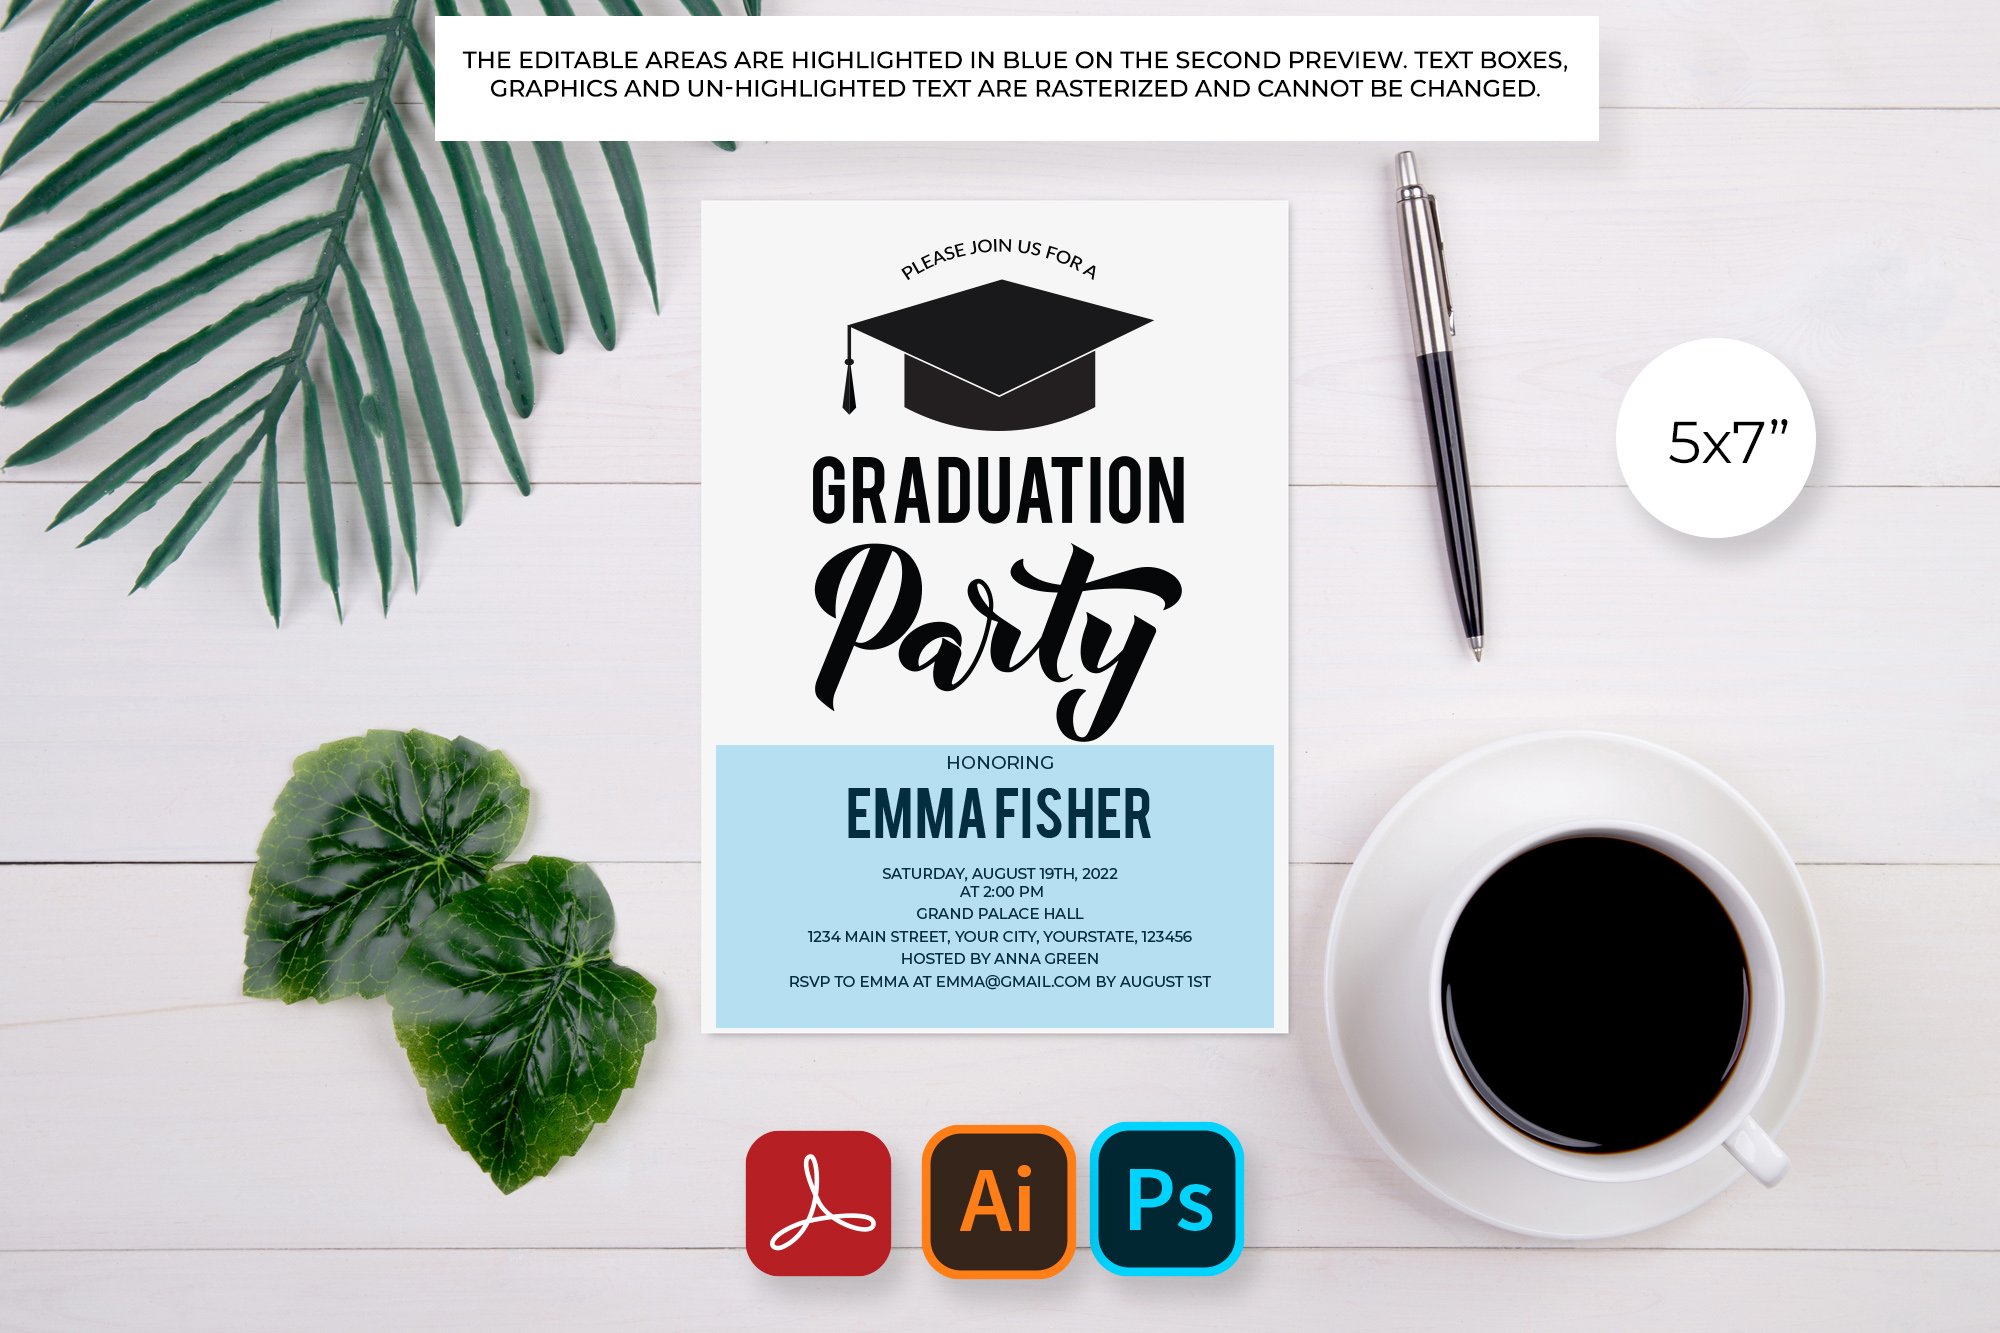 Graduation Party Invitation Card preview image.